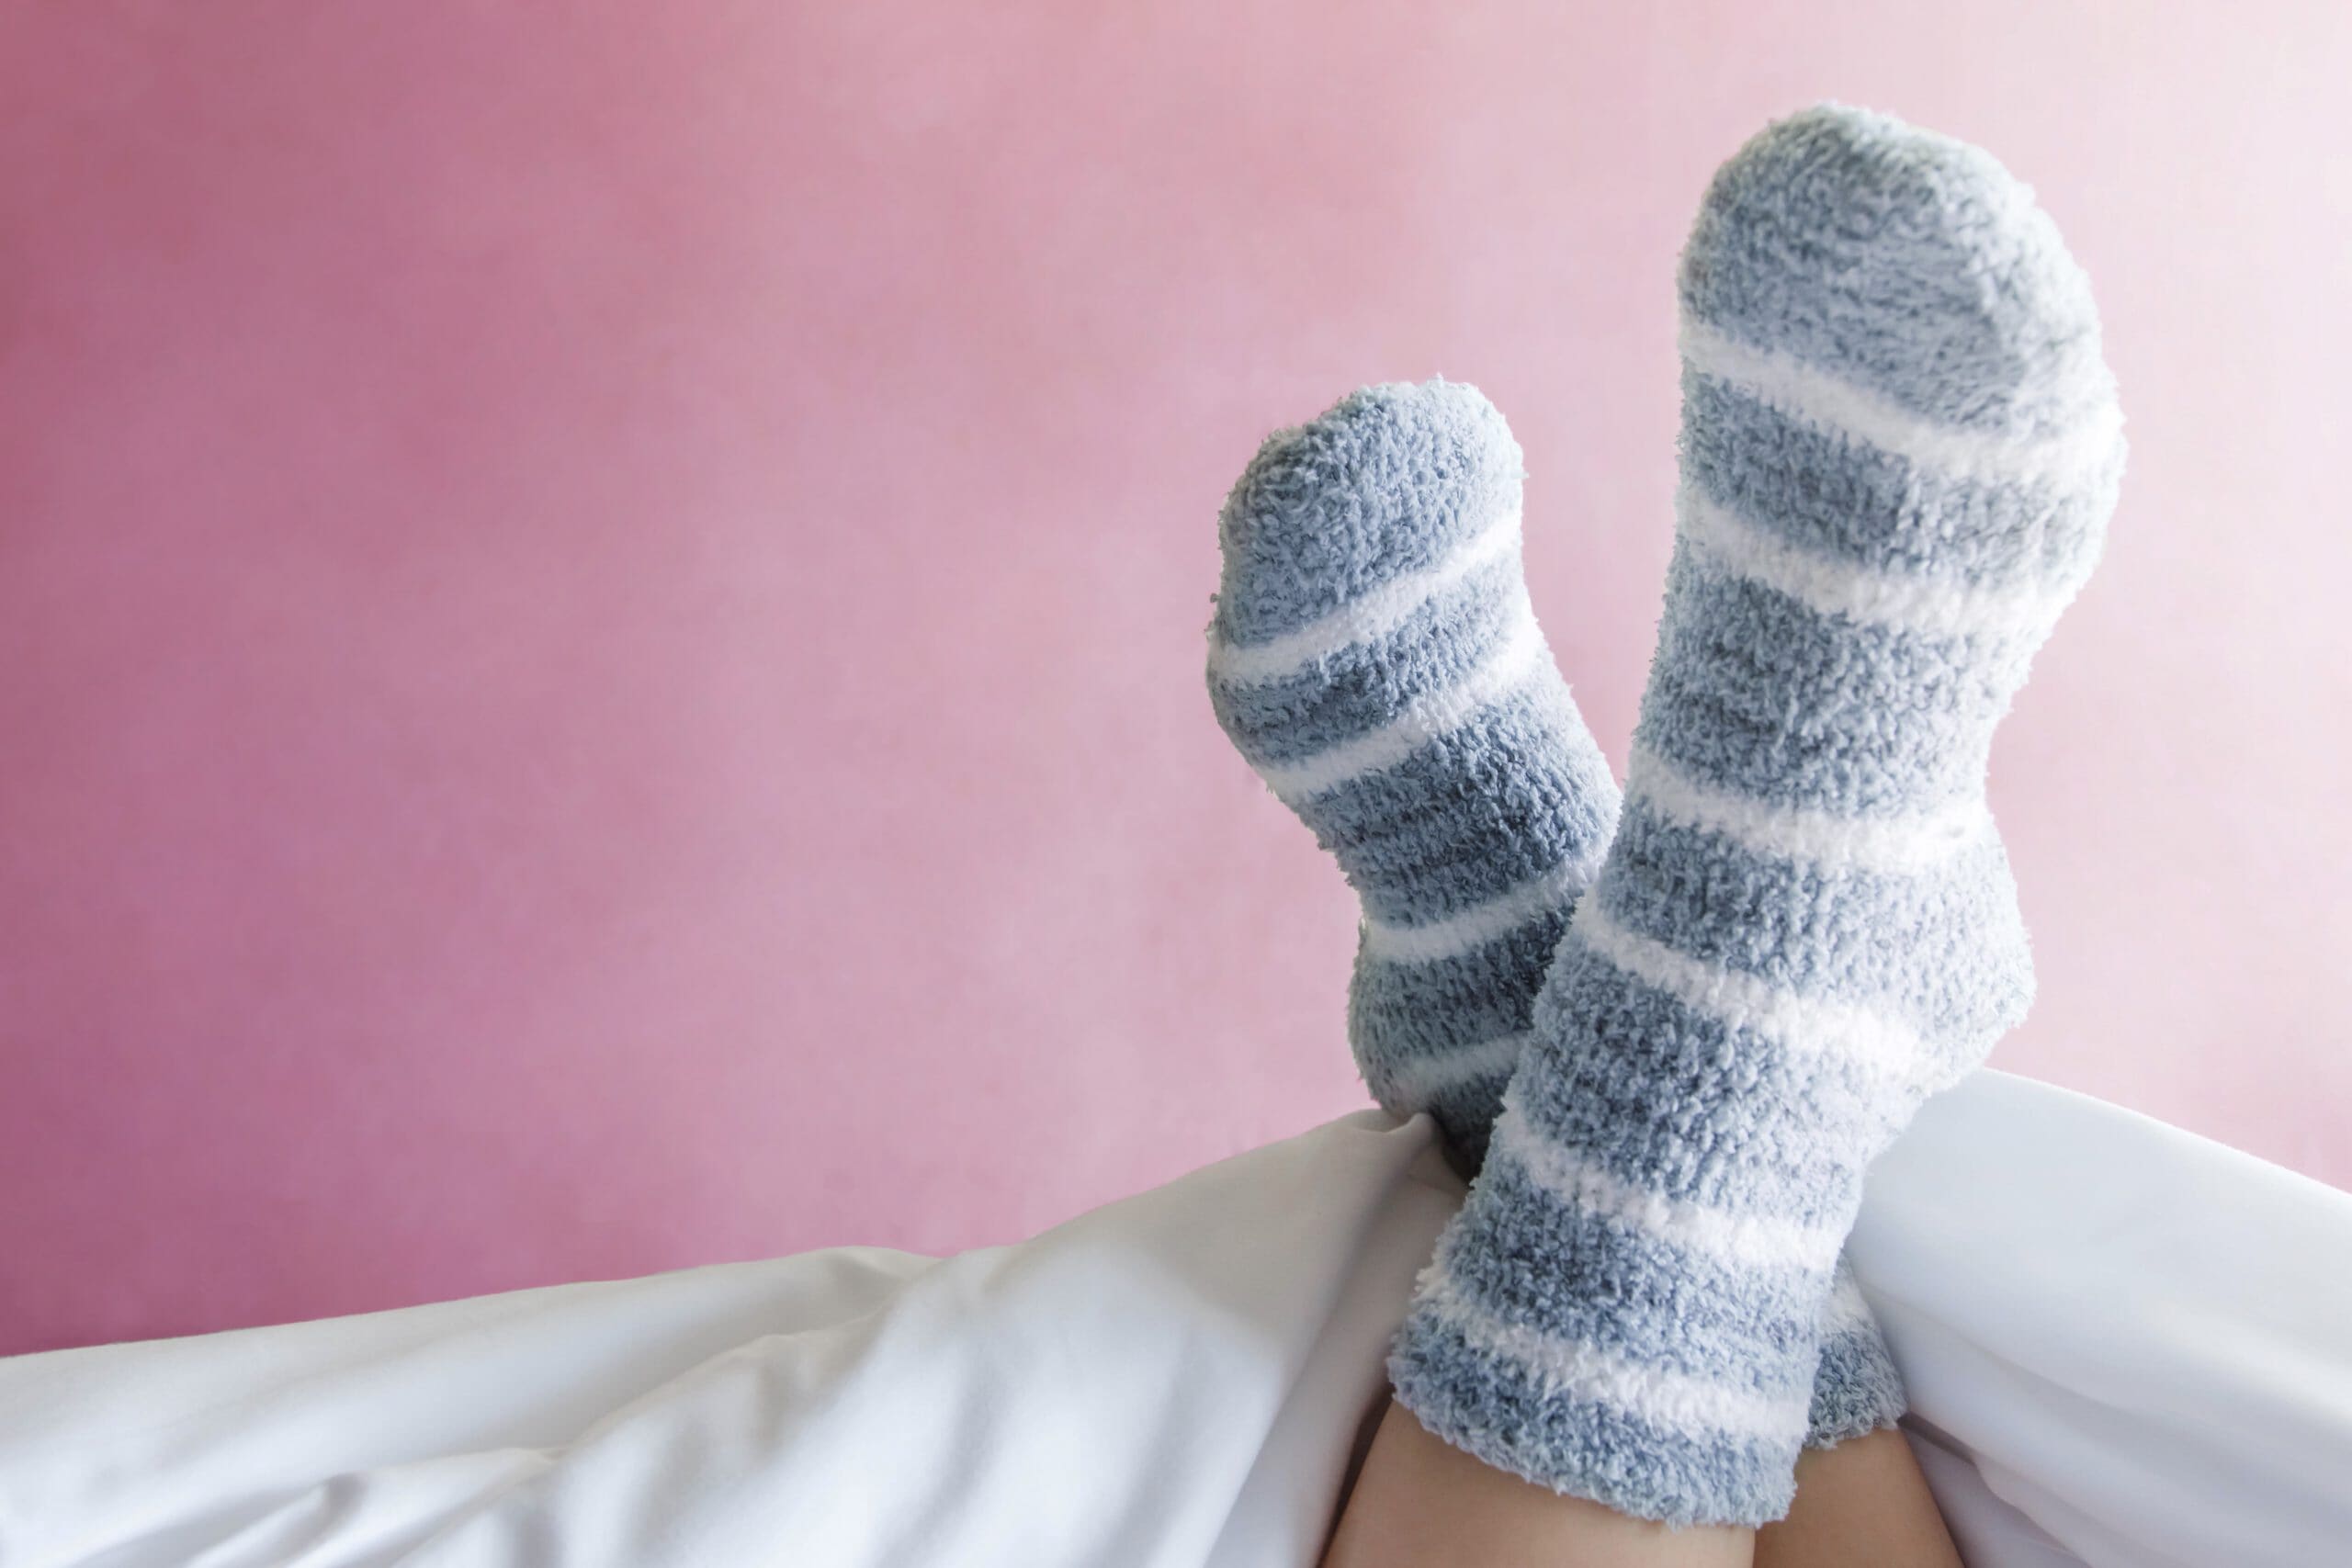 Wearing Socks to Bed Can Help You Fall Asleep Faster: Here's How